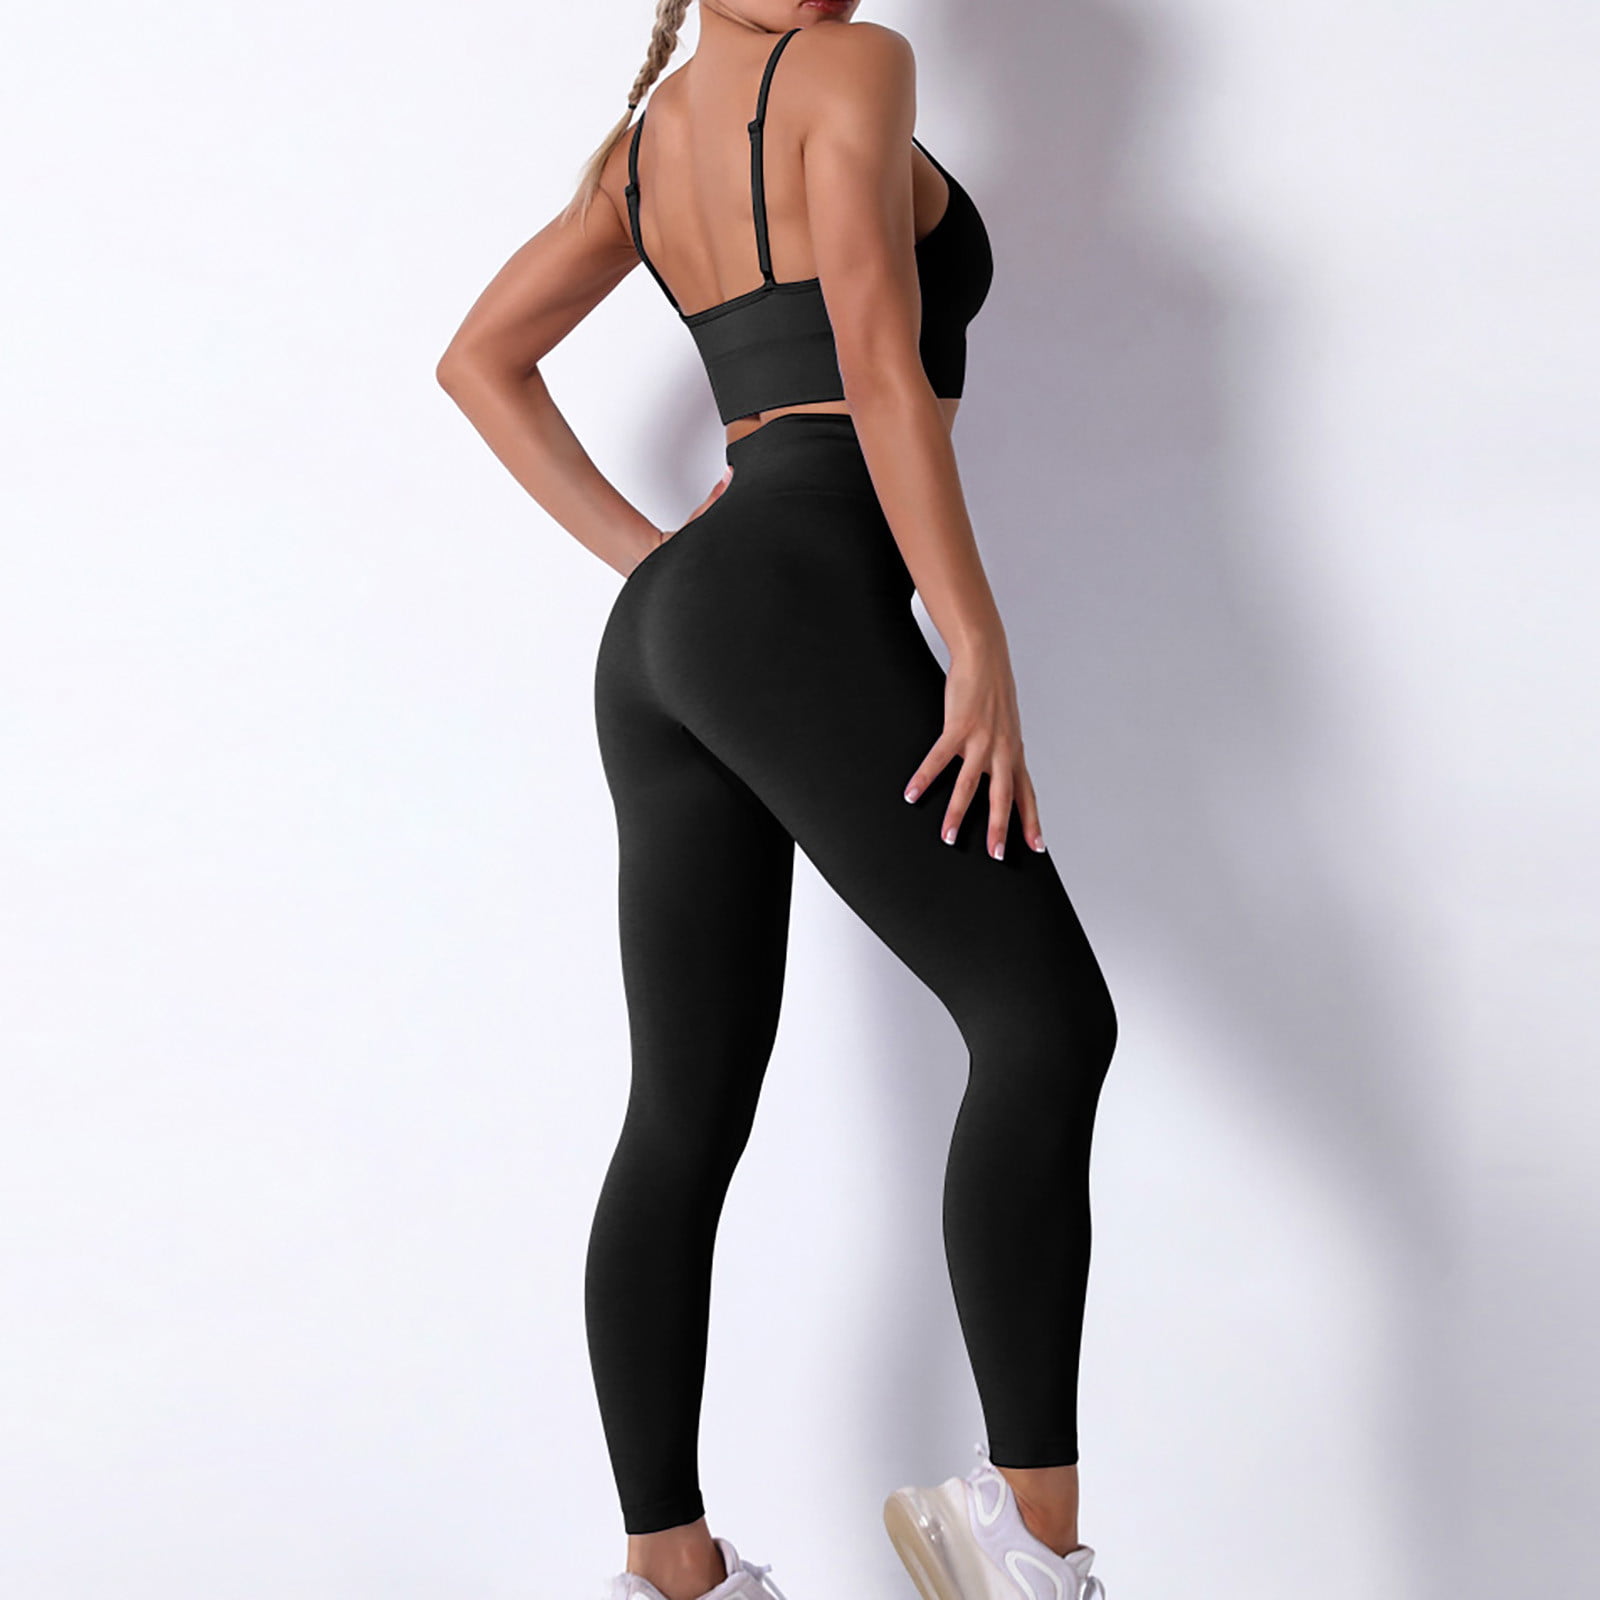 Newest Design Sexy Exercise Outfits Ribbed Compression Workout Clothes for  Women, Strappy Yoga Bra + Athletic Leggings with Phone Pockets Yoga Apparel  - China Sports Bra and Leggings Set and Athletic Stretch